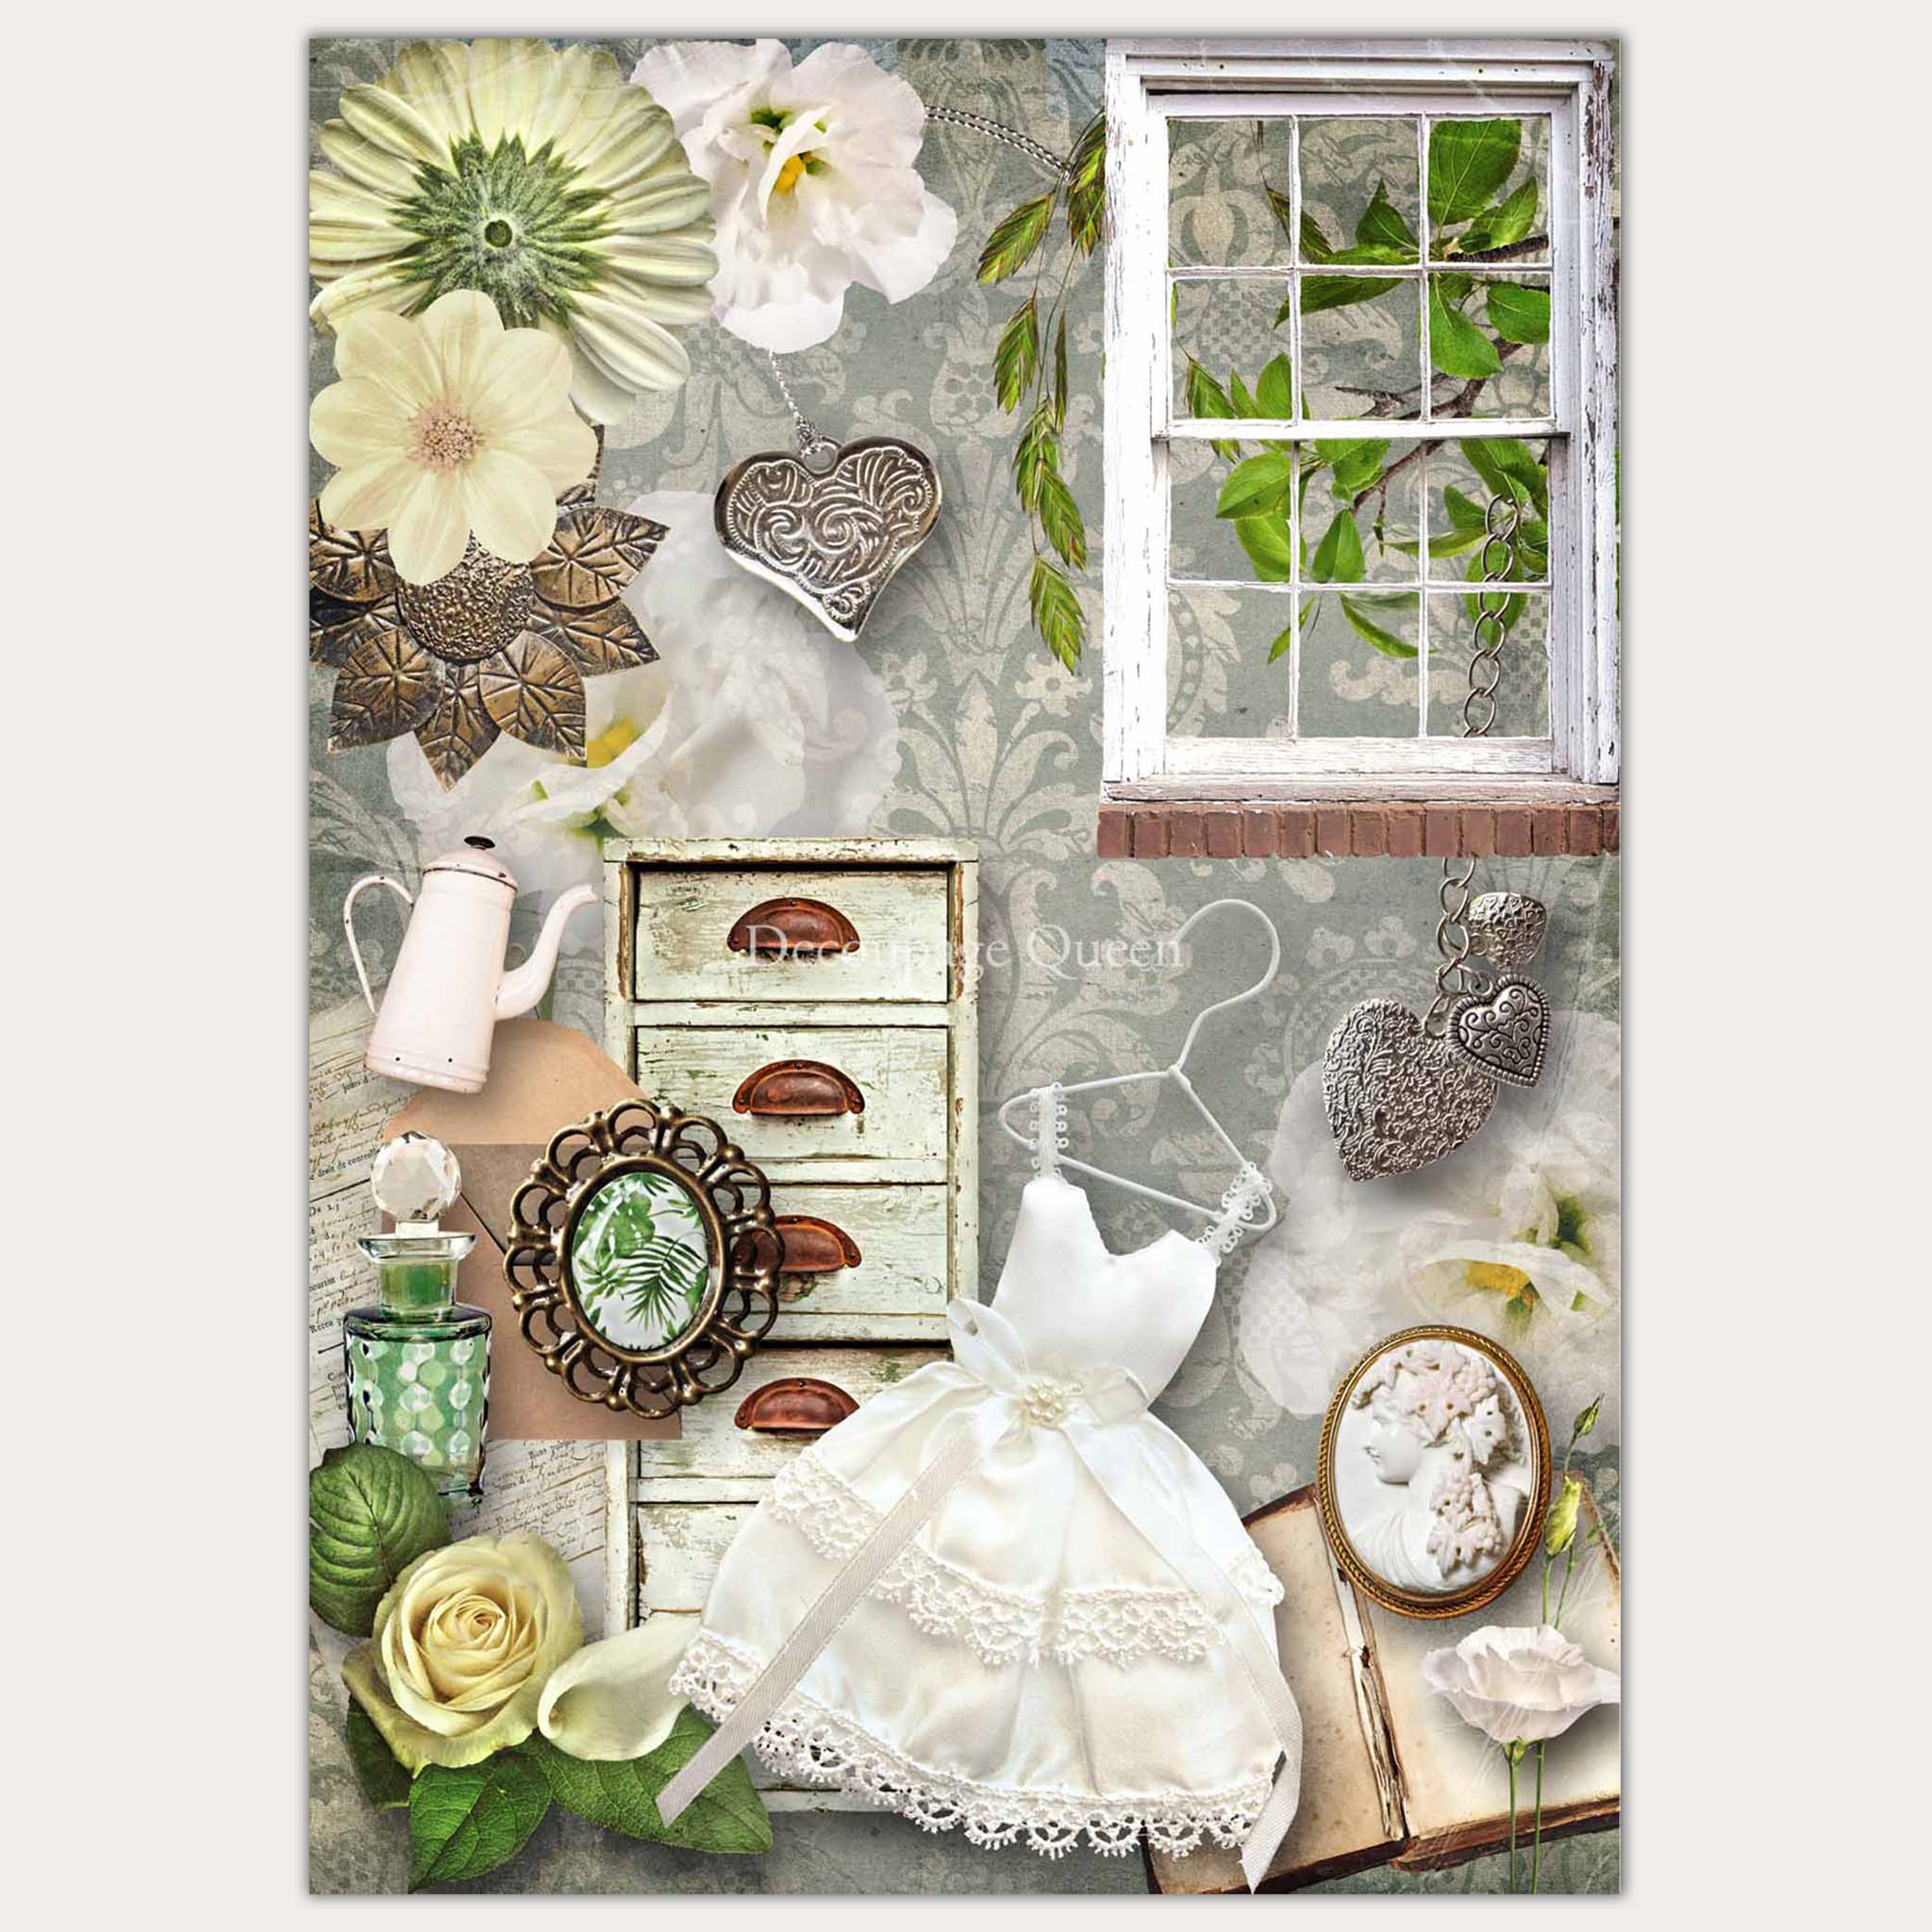 A4 rice paper design that features a collage of silver heart necklaces, a girls white dress on a hanger, a perfume bottle, a distressed vintage chest dresser, a white 12 pane vintage window, and white flowers against a damask wallpaper. White borders are on the sides.